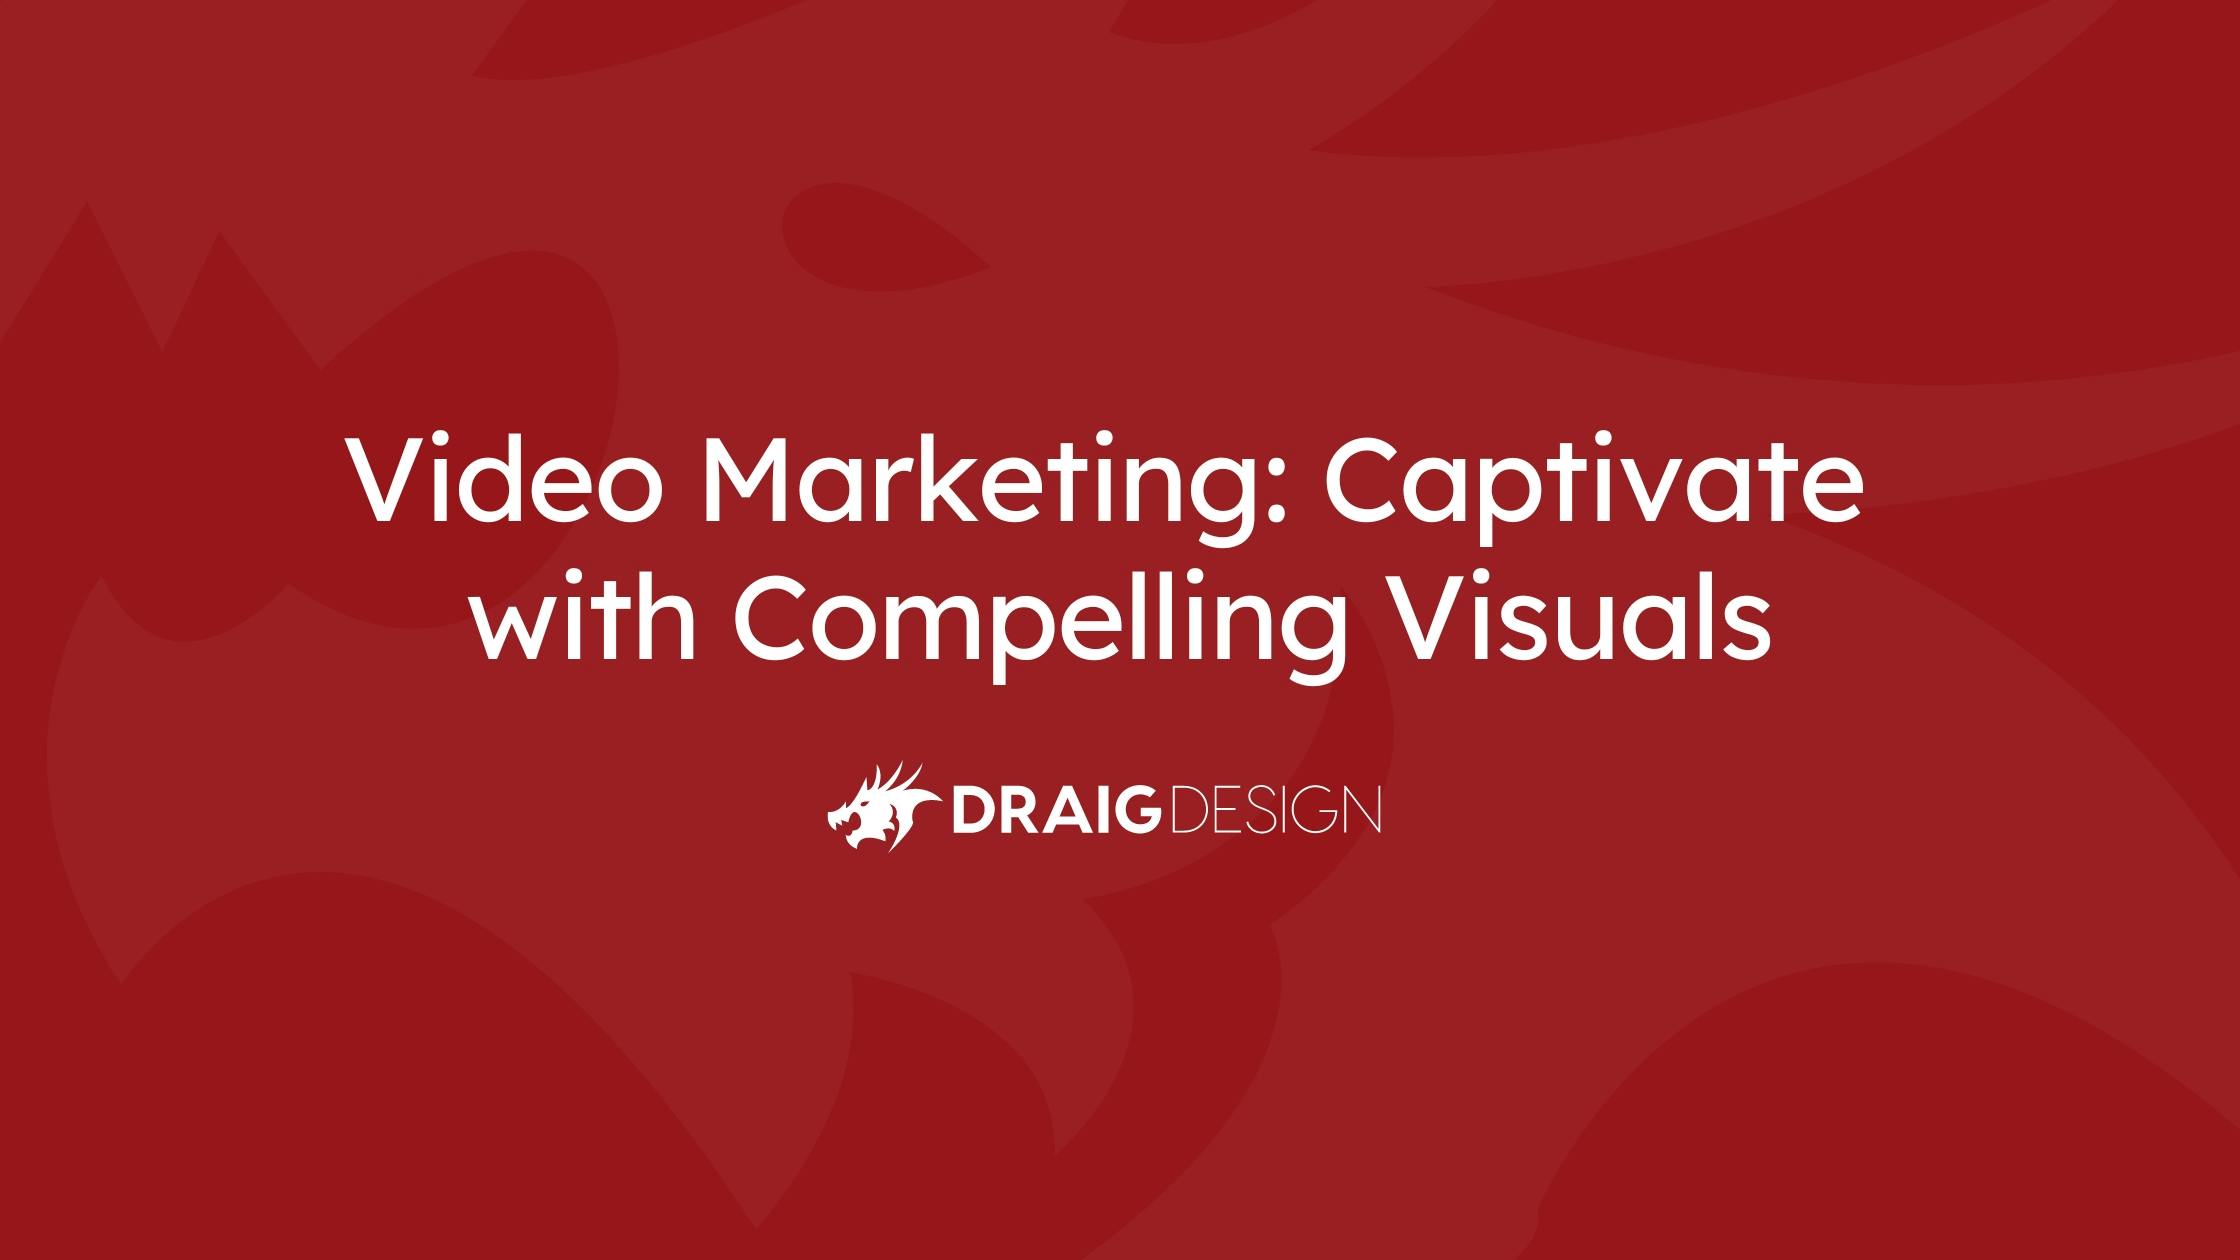 Video Marketing: Captivate with Compelling Visuals